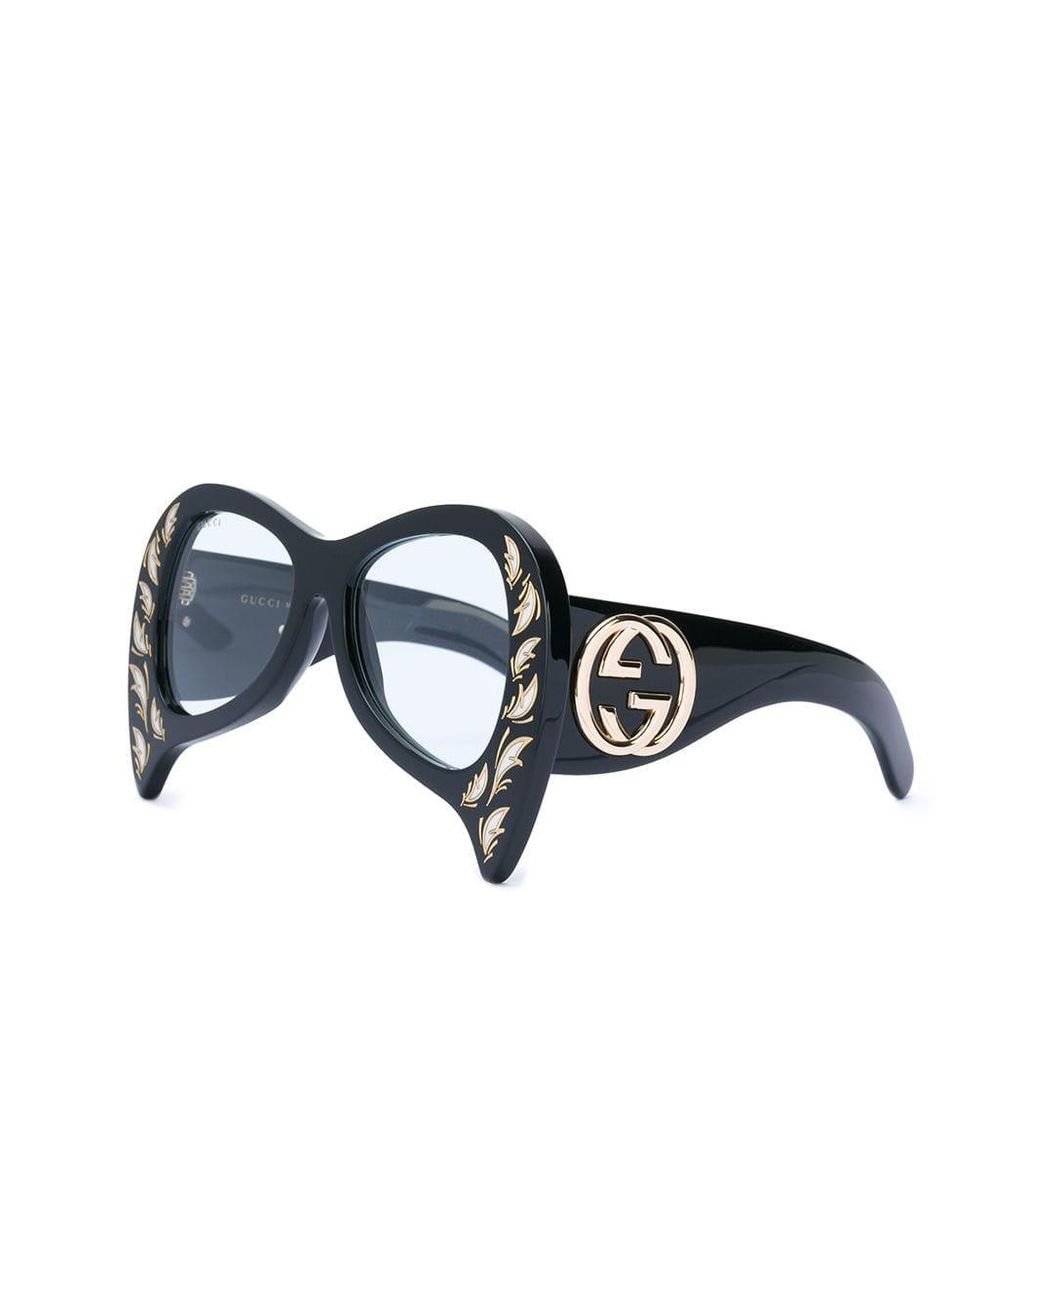 Gucci Inverted Cat Eye Glasses in Black | Lyst